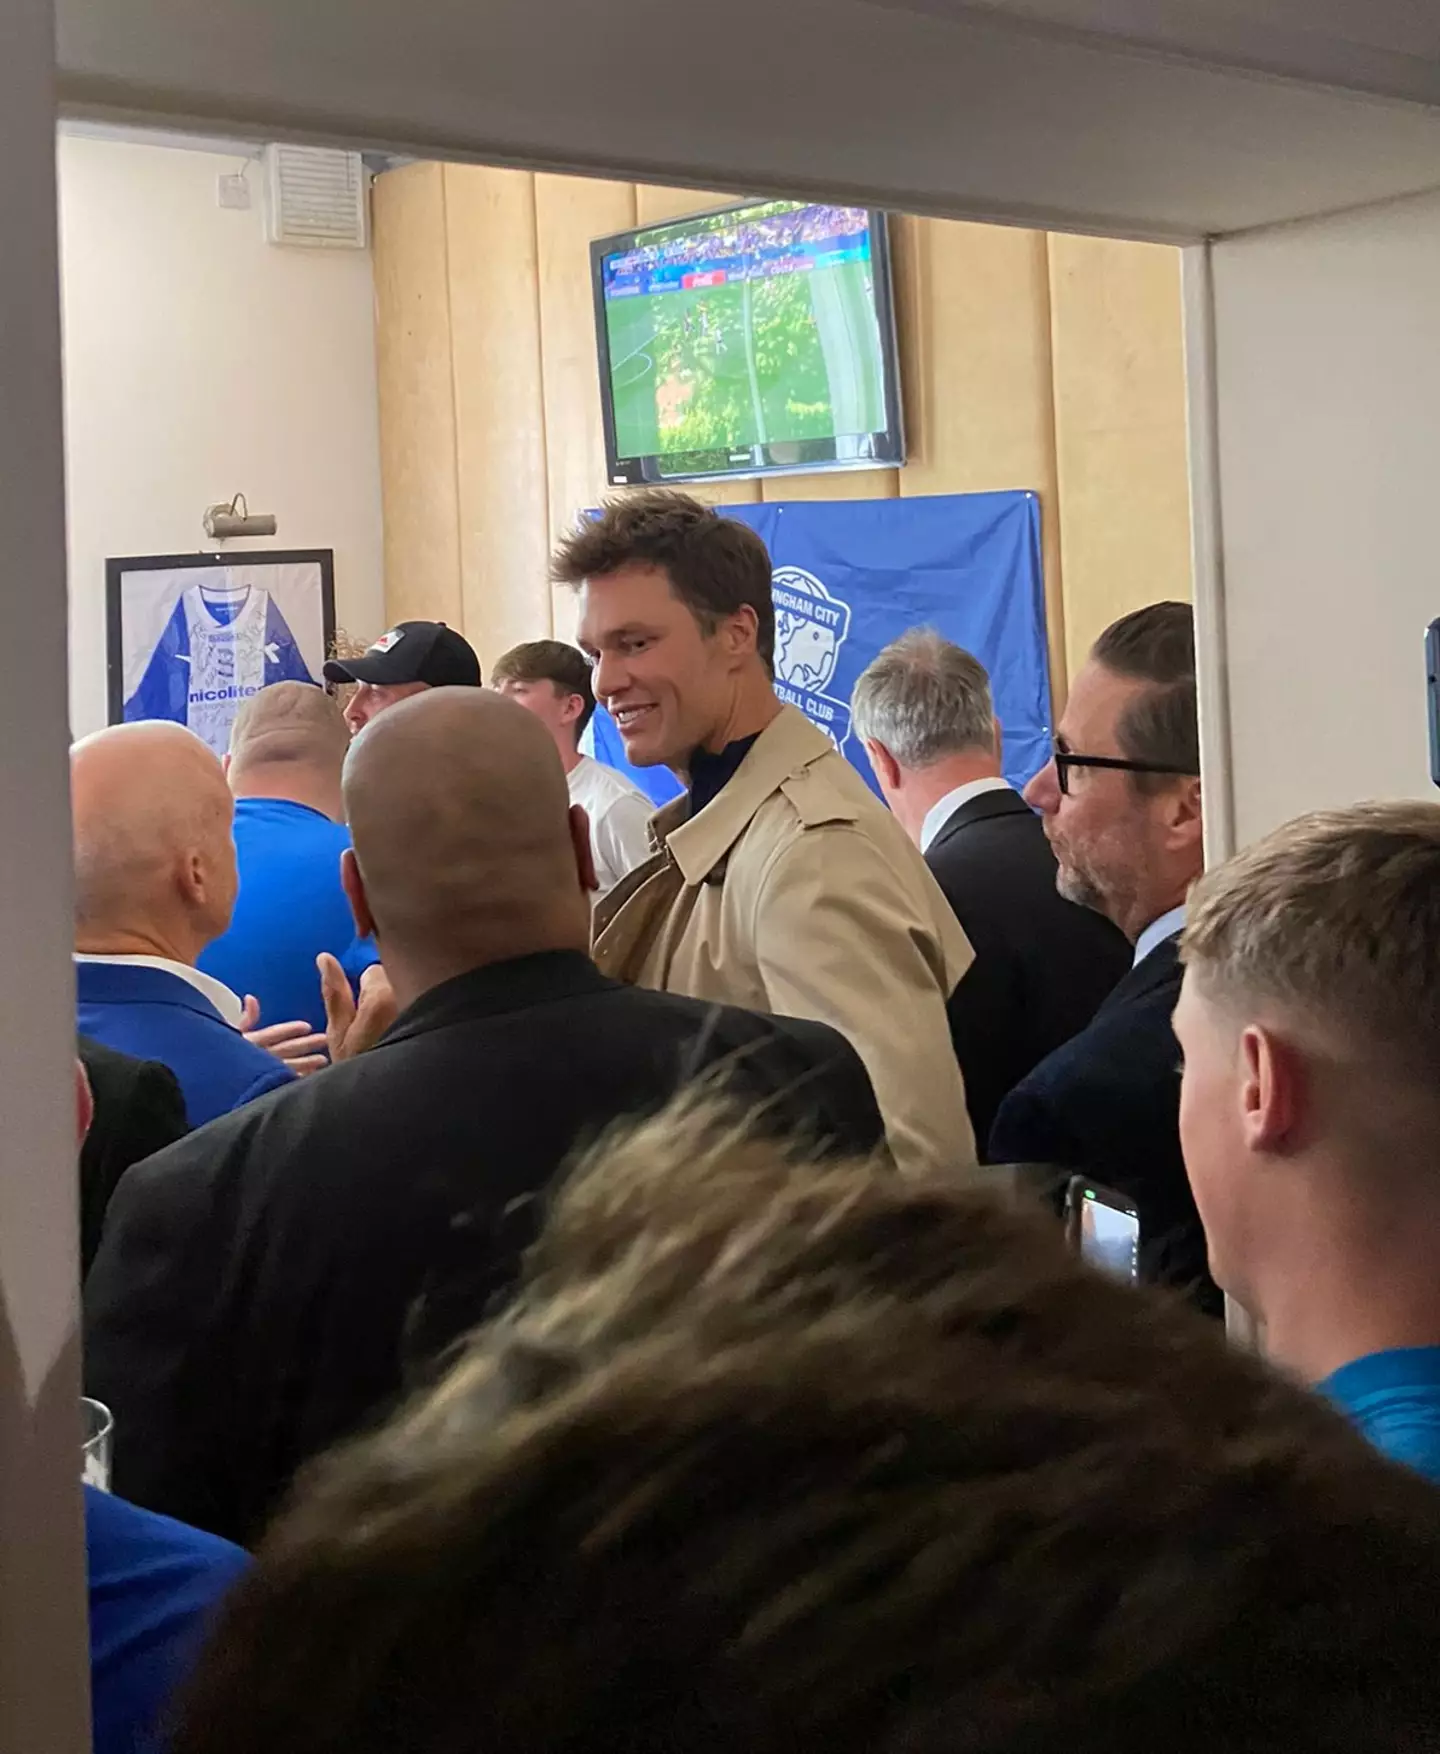 Tom Brady bought pints for Birmingham City fans ahead of their game with Leeds United.